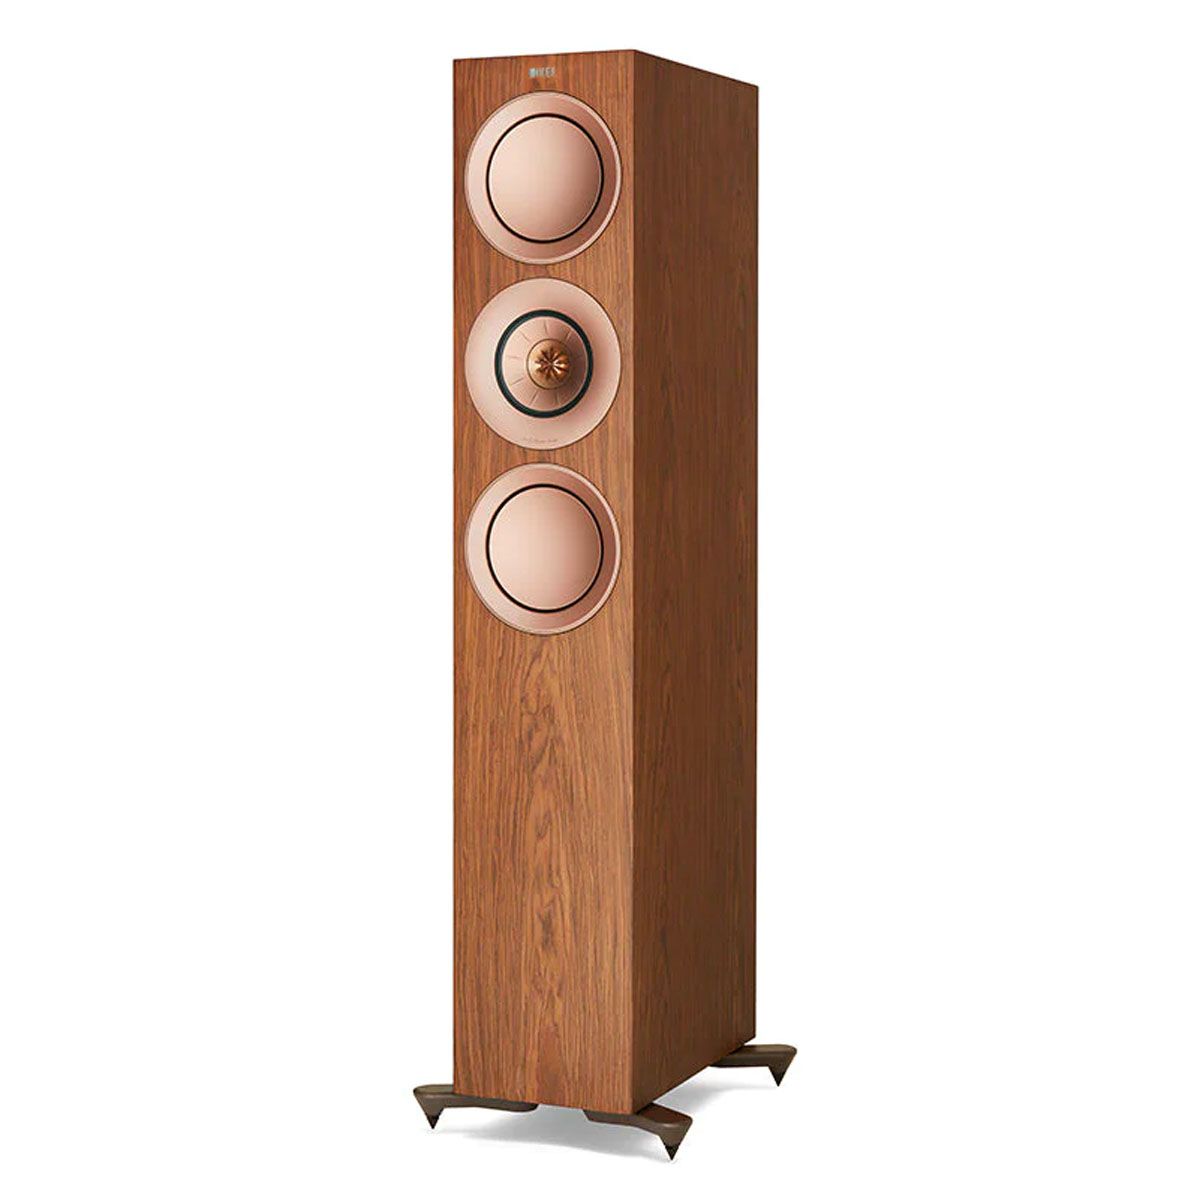 KEF R7 Floorstanding Loudspeaker - Walnut - angled front view without grille